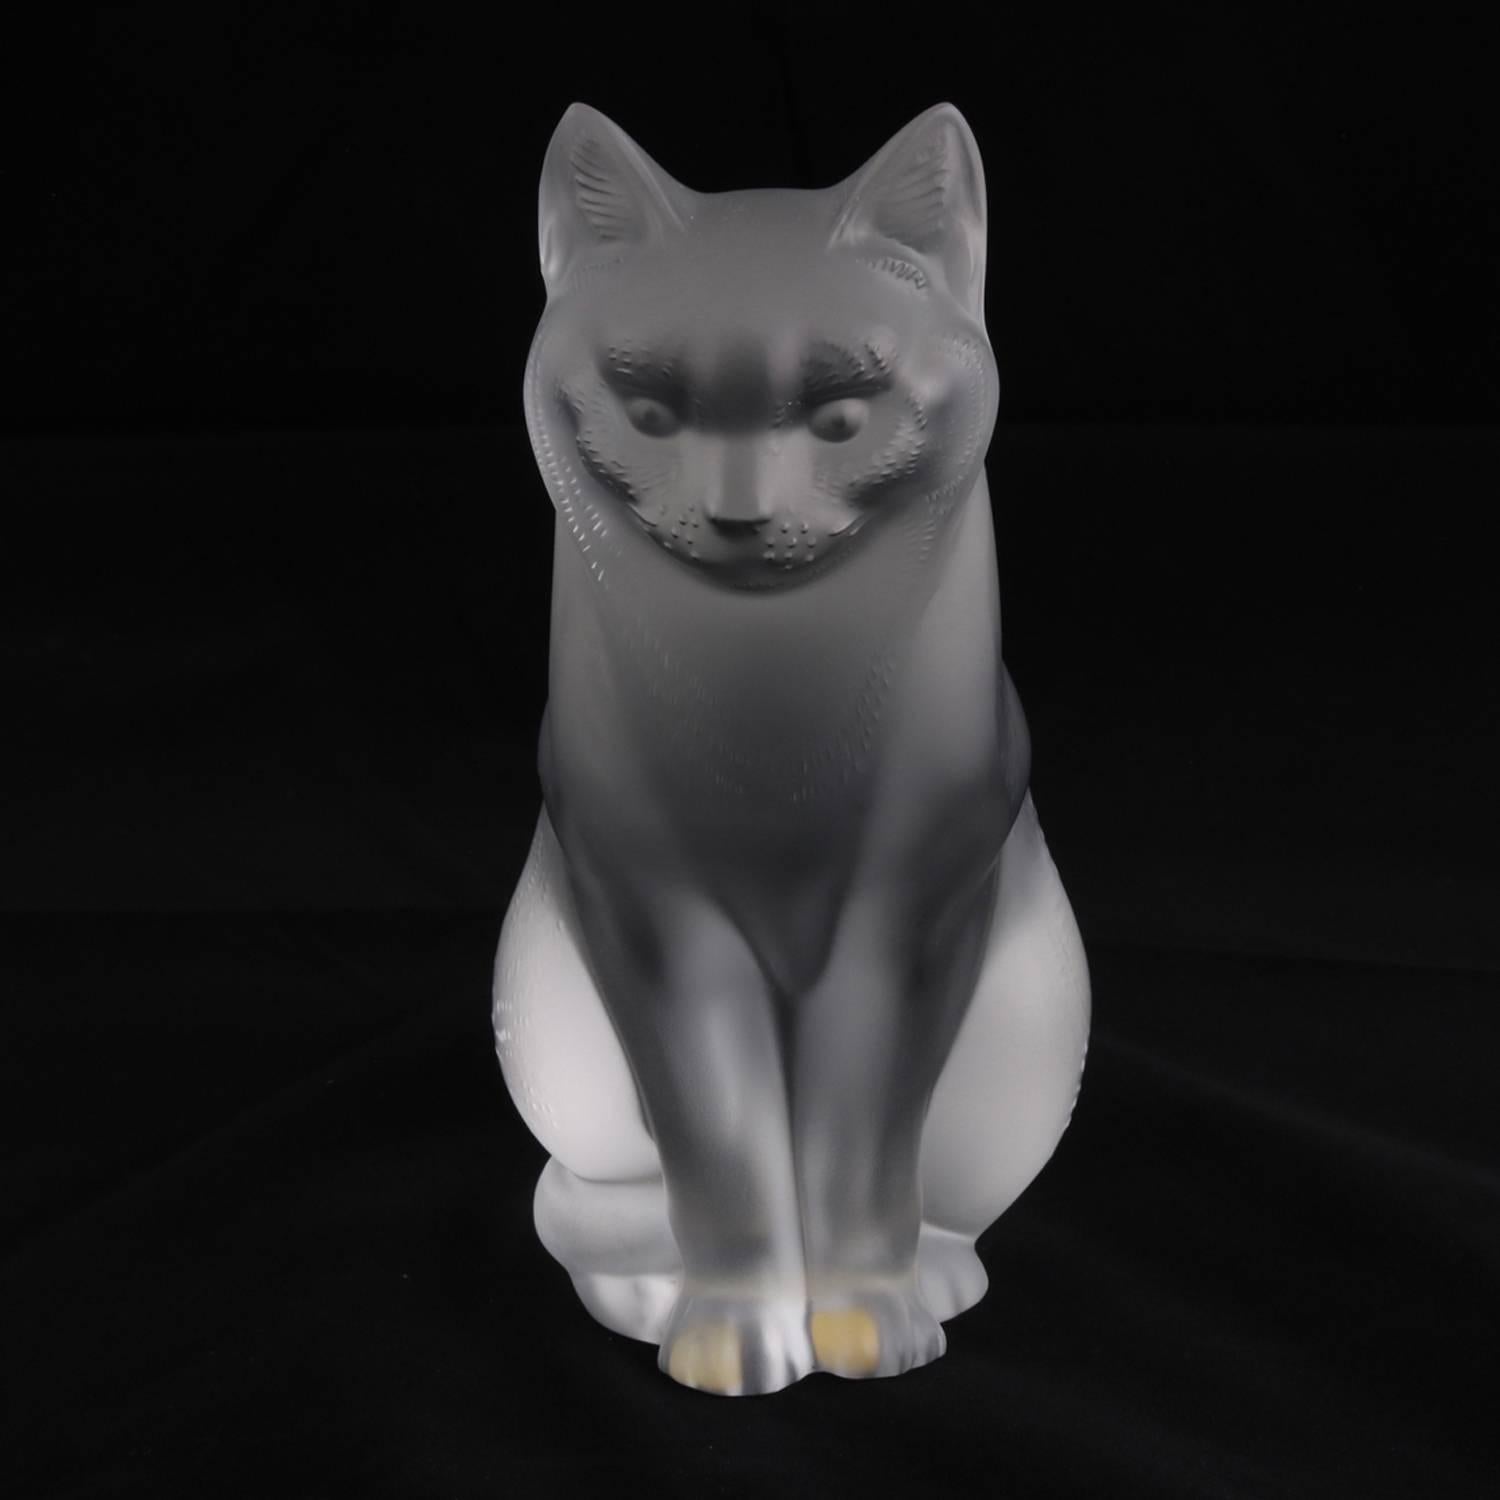 French Lalique figural animal sculpture of a sitting cat executed in frosted crystal, Lalique style no: 1160300, signed on base and with original made in France label, 20th century.

Measures: 8.5